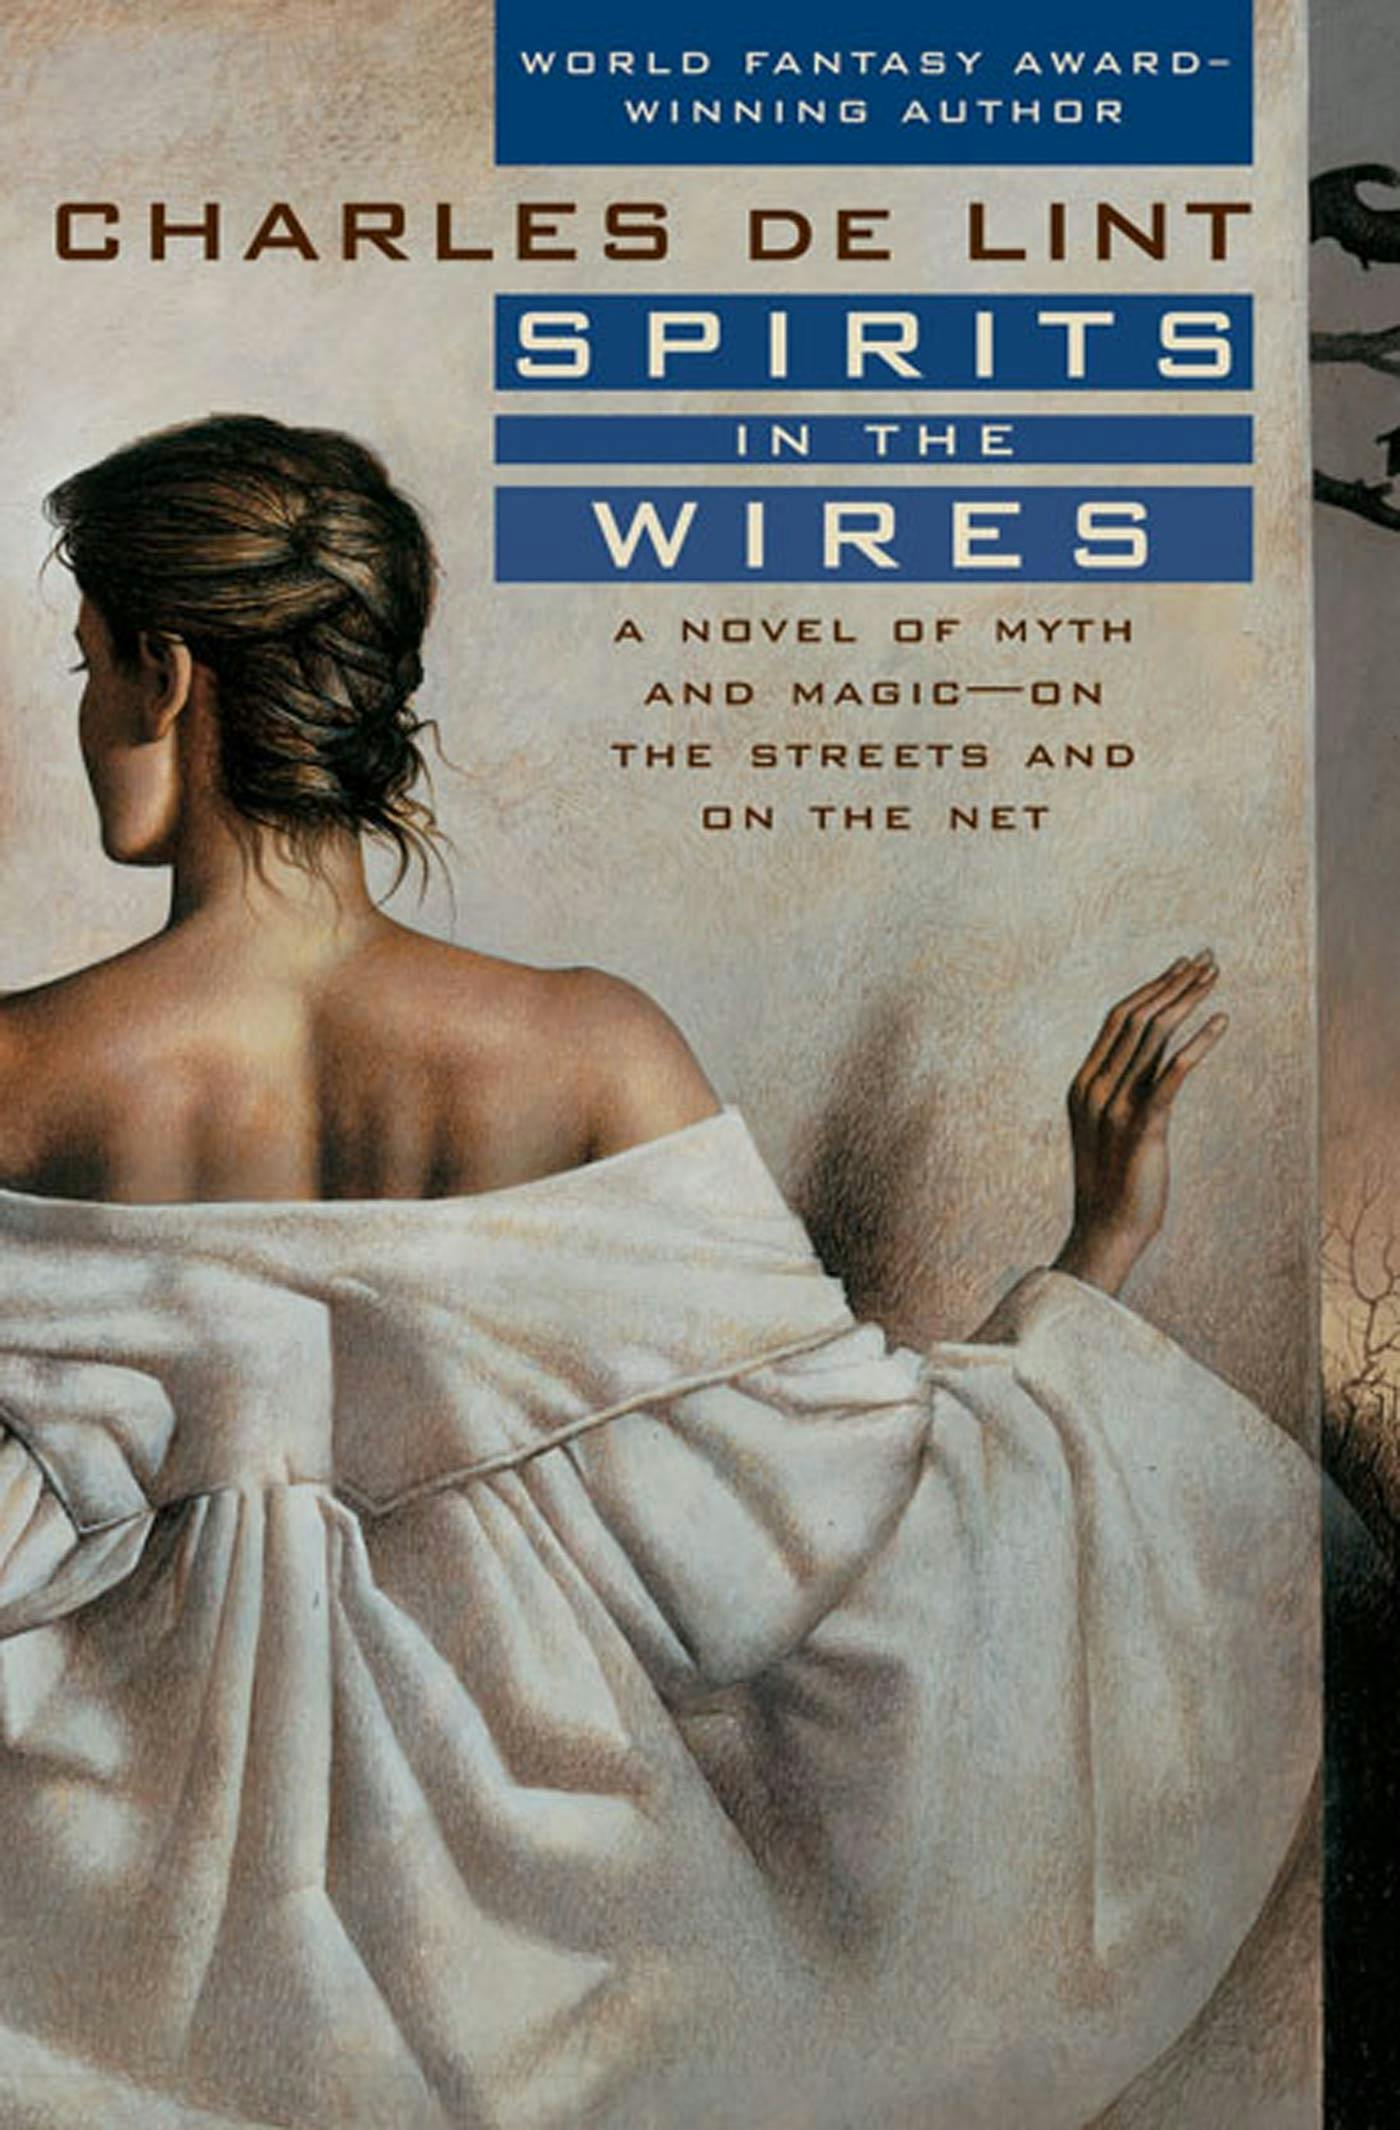 Cover for the book titled as: Spirits in the Wires